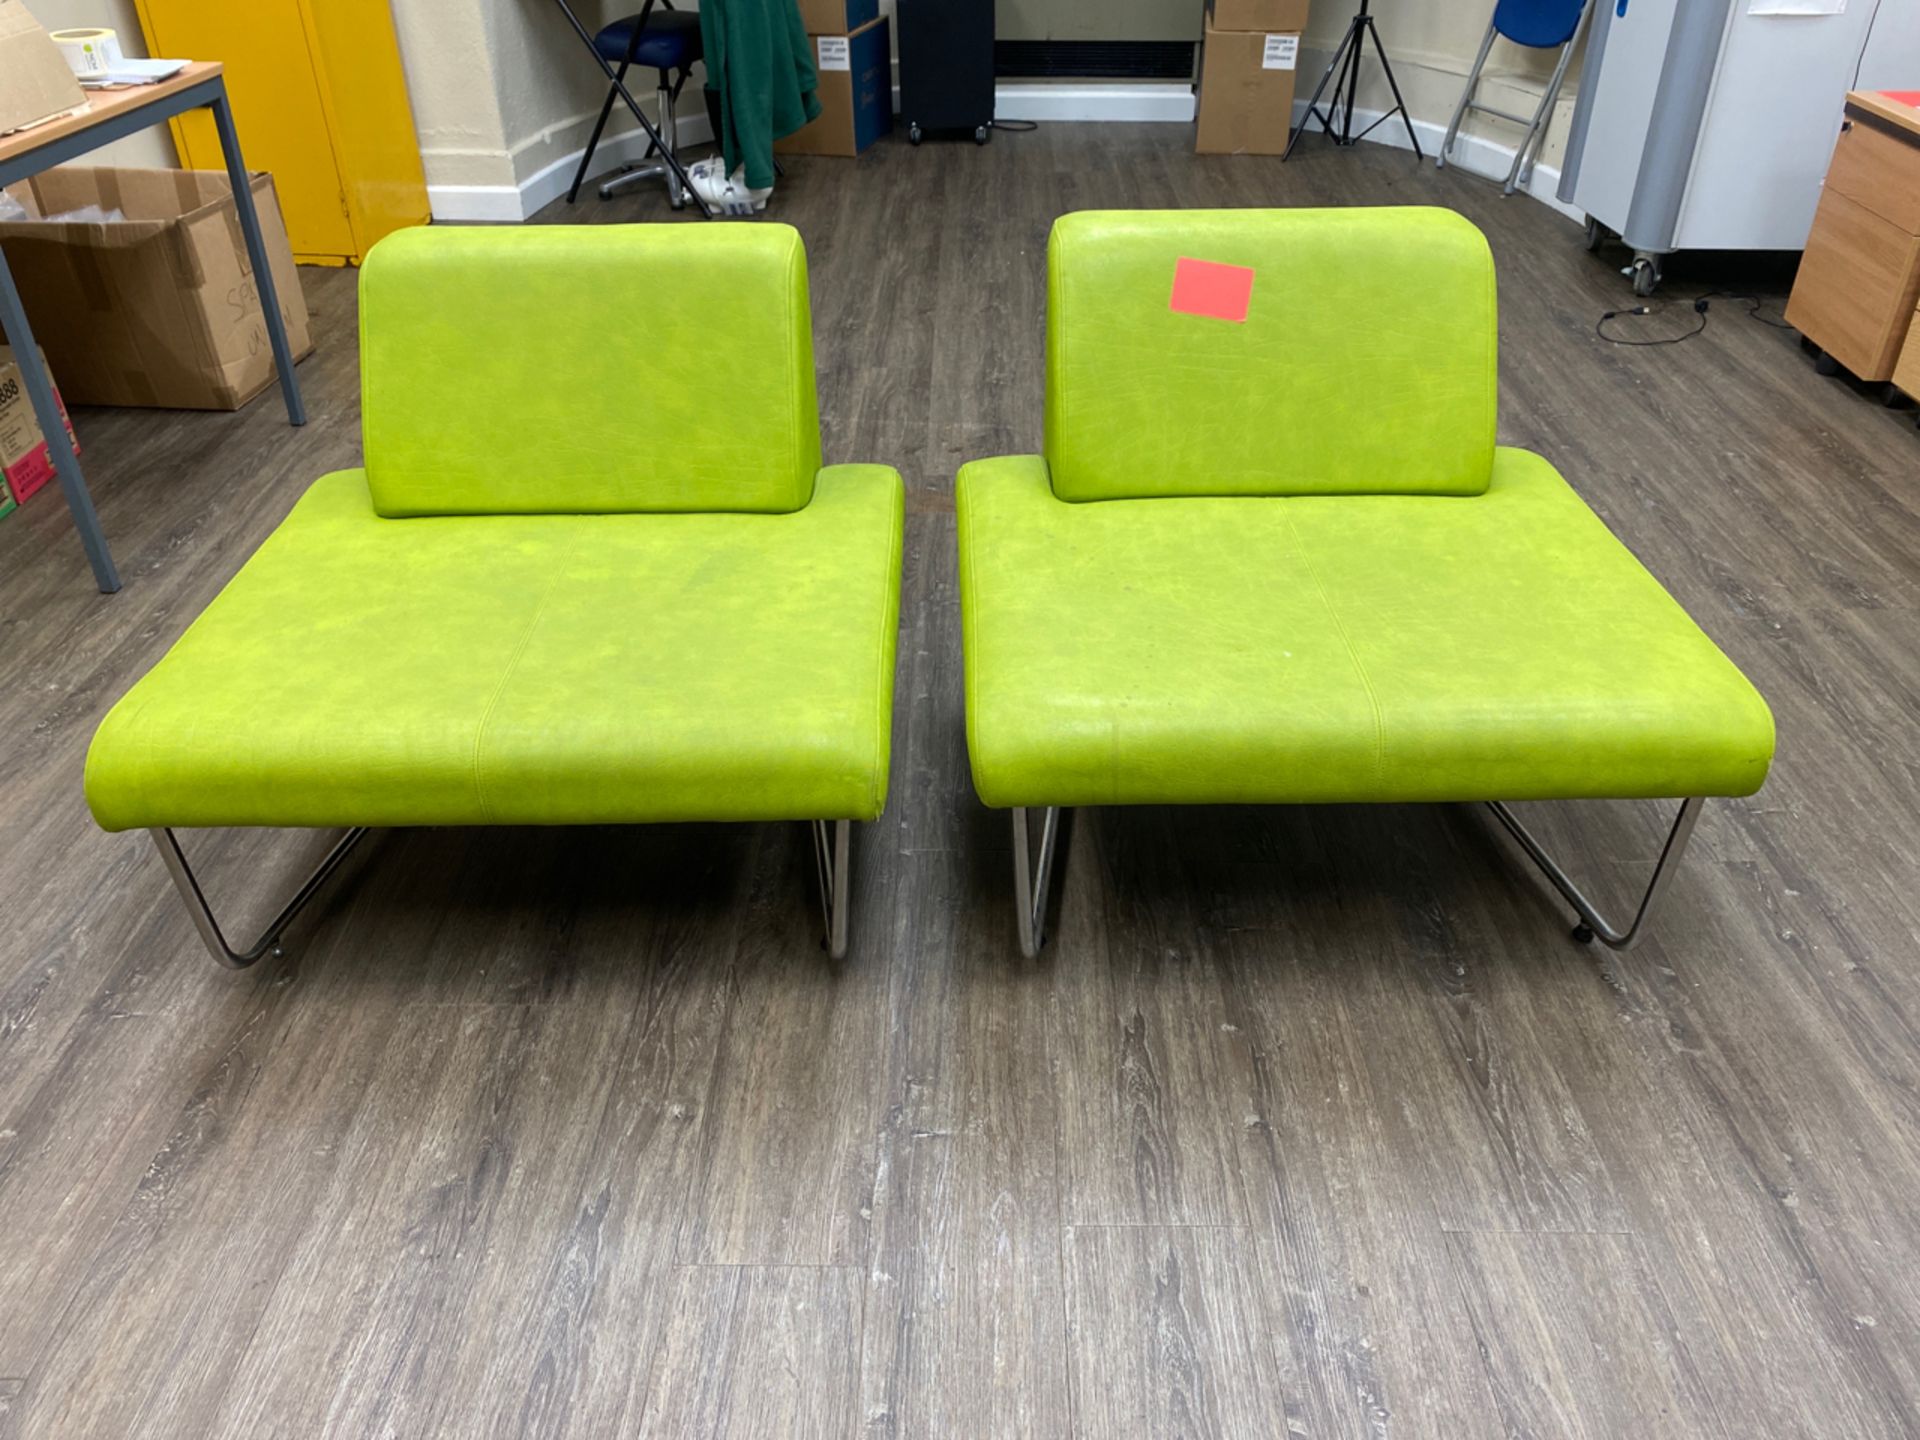 Pair of Contemporary Reception Chairs - Image 2 of 12